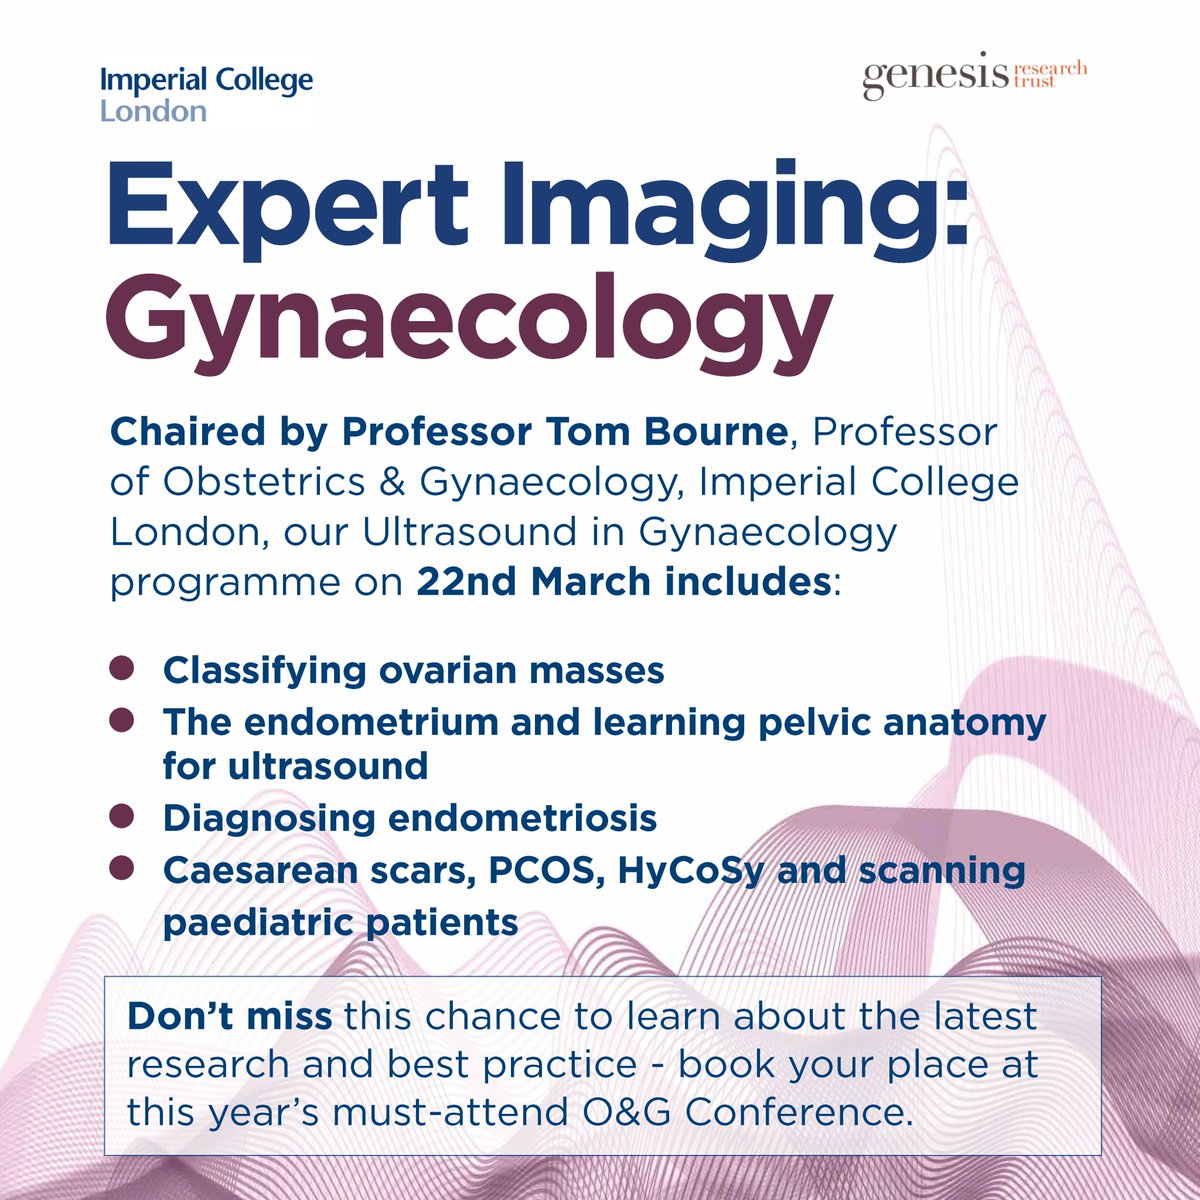 All you need to know about EIOG 2024's dedicated #gynaecology seminar👇

📅Fri 22nd Mar 2024 
📌 QEII Conference Centre, Westminster, London
🩺Chaired by @proftombourne Professor of #Obstetrics & #Gynaecology @imperialcollege 
ℹ️ Full programme & tickets bit.ly/44U8MEw